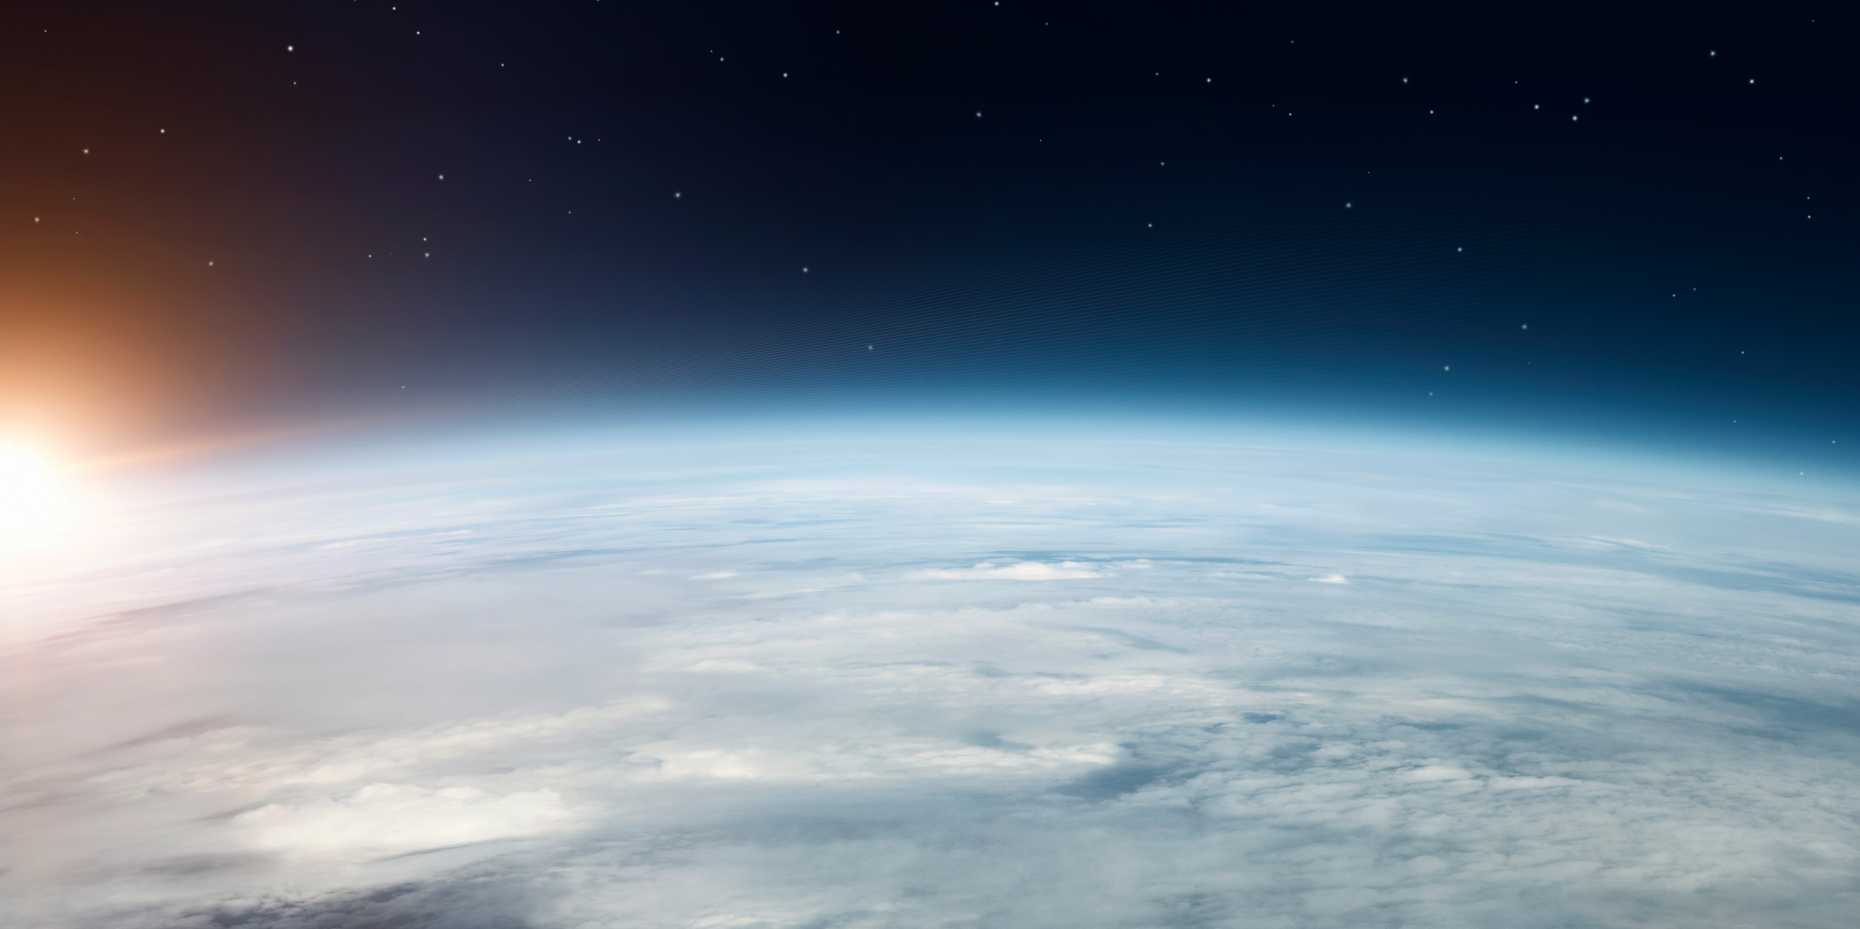 Enlarged view: The ozone layer in the atmosphere protects against damaging UV rays.